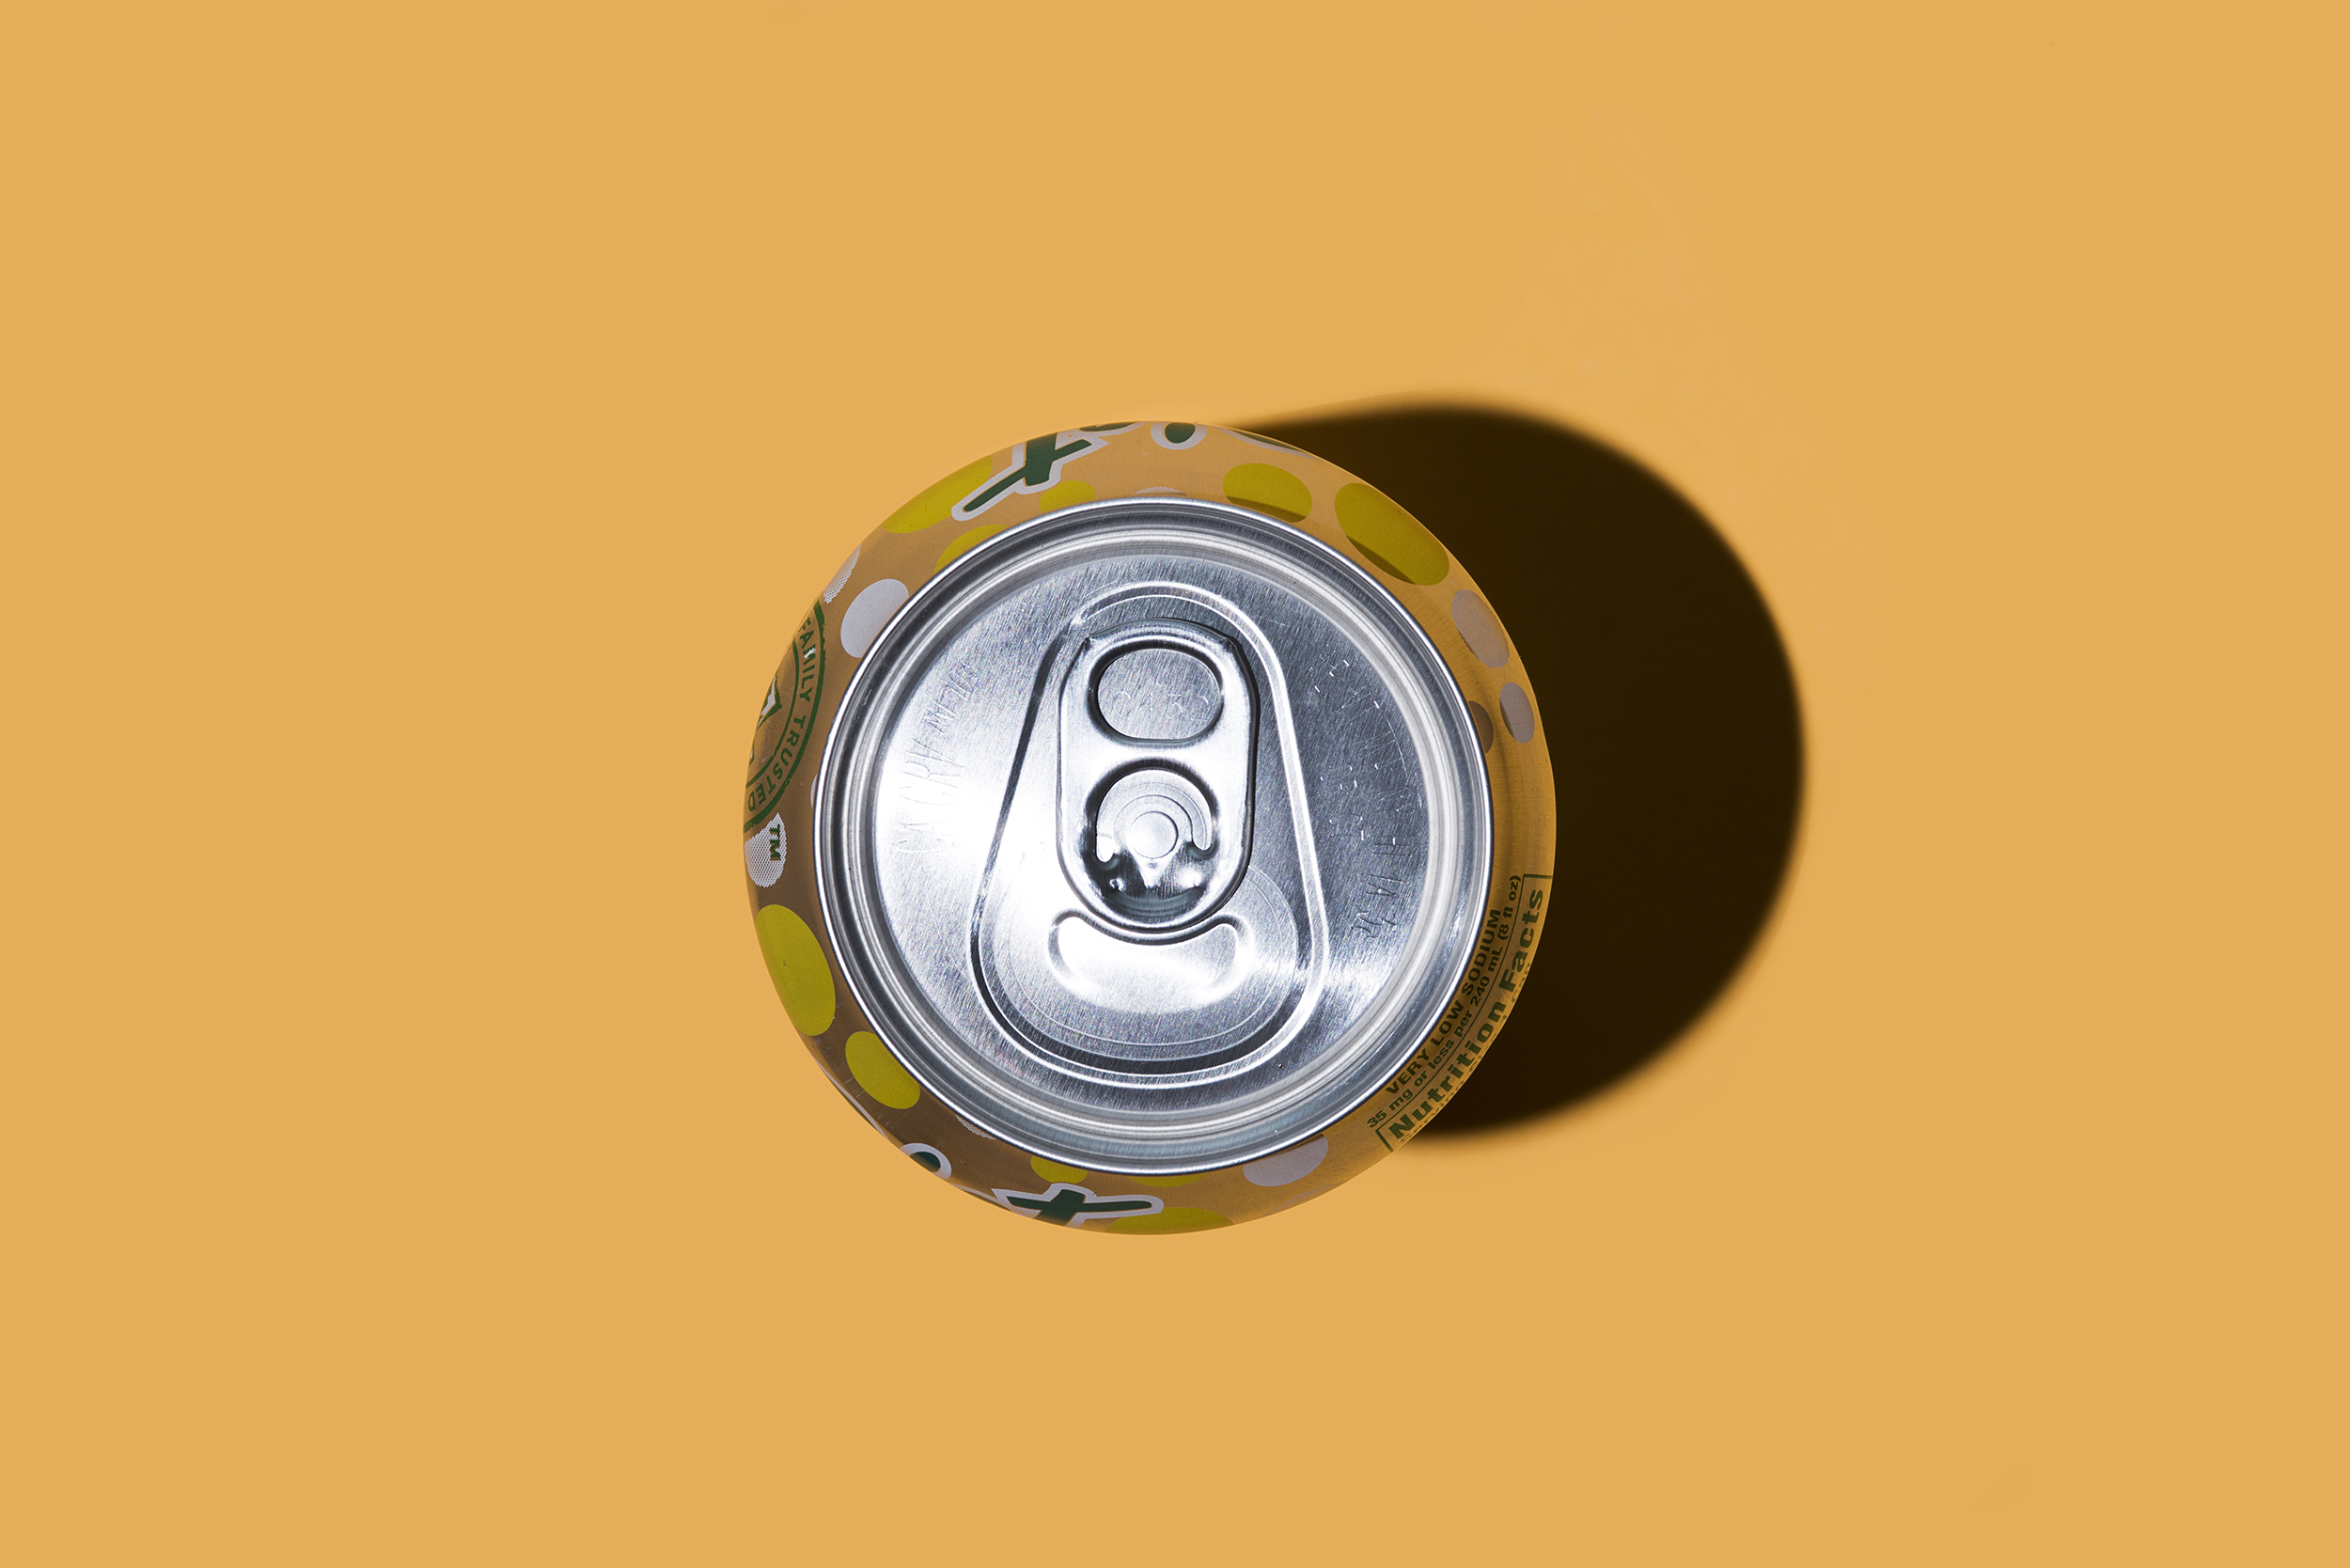 soda-can-drink-diet-health-fitness-motto-stock